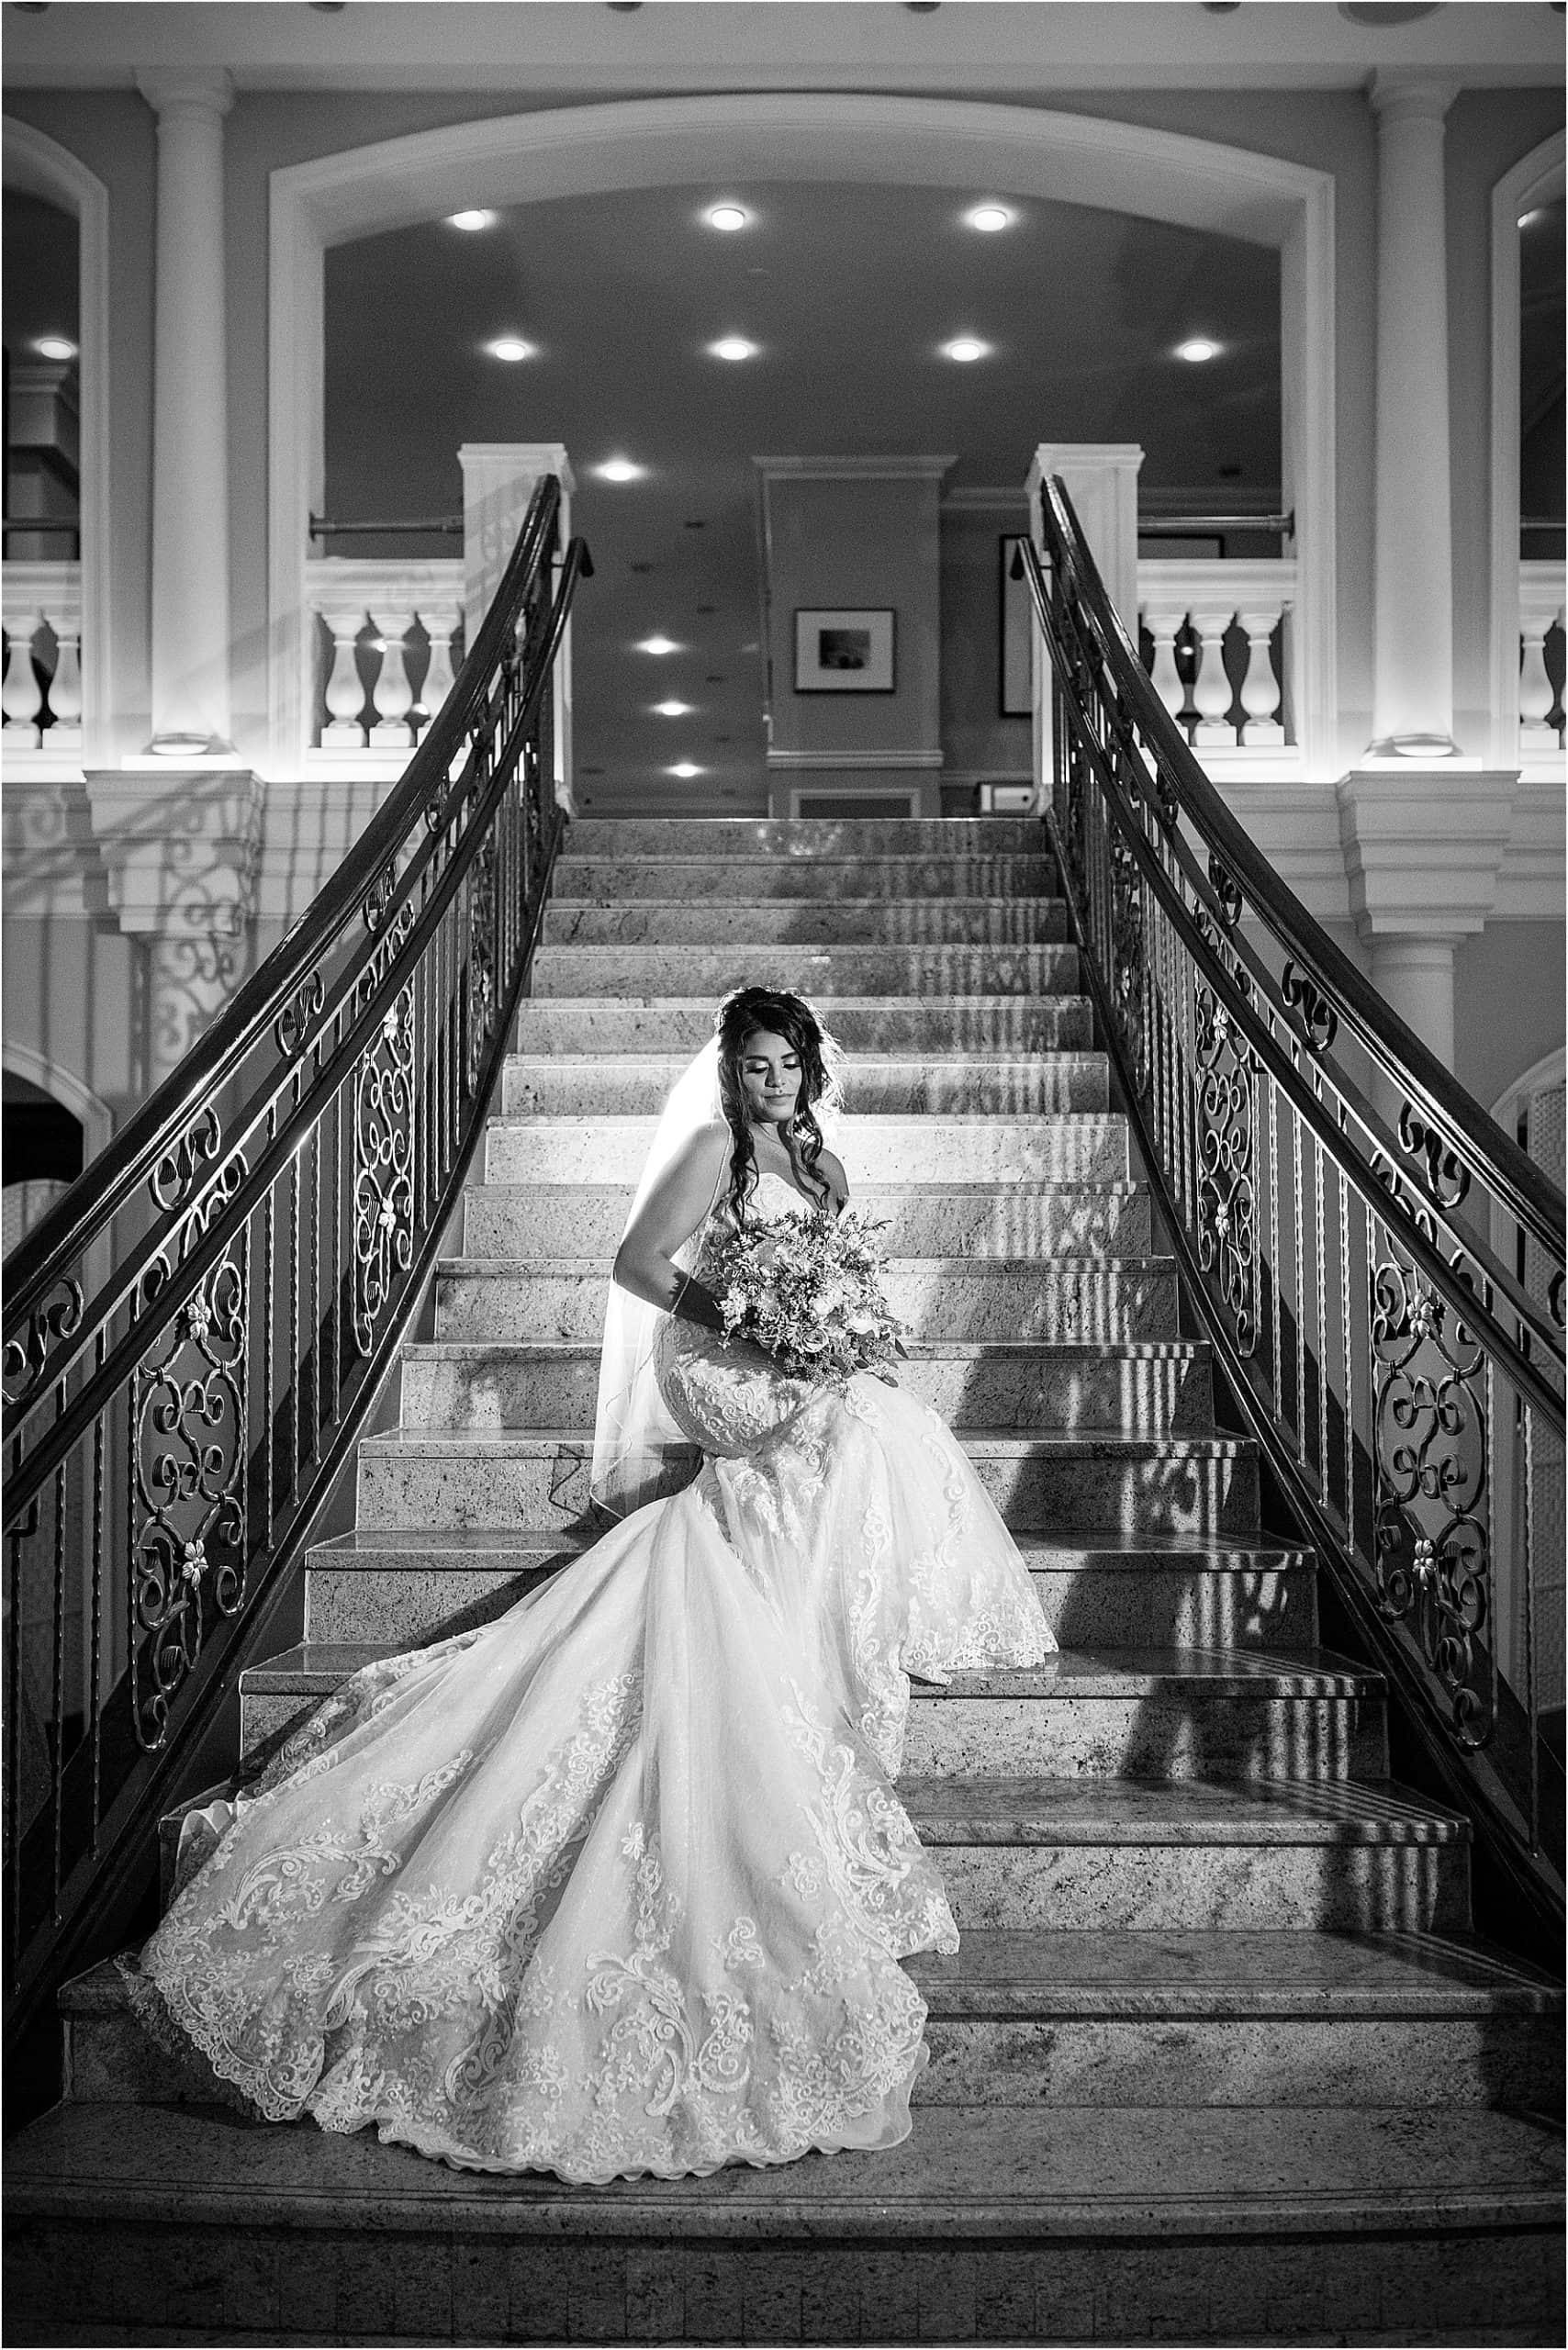 Bride on staircase black and white